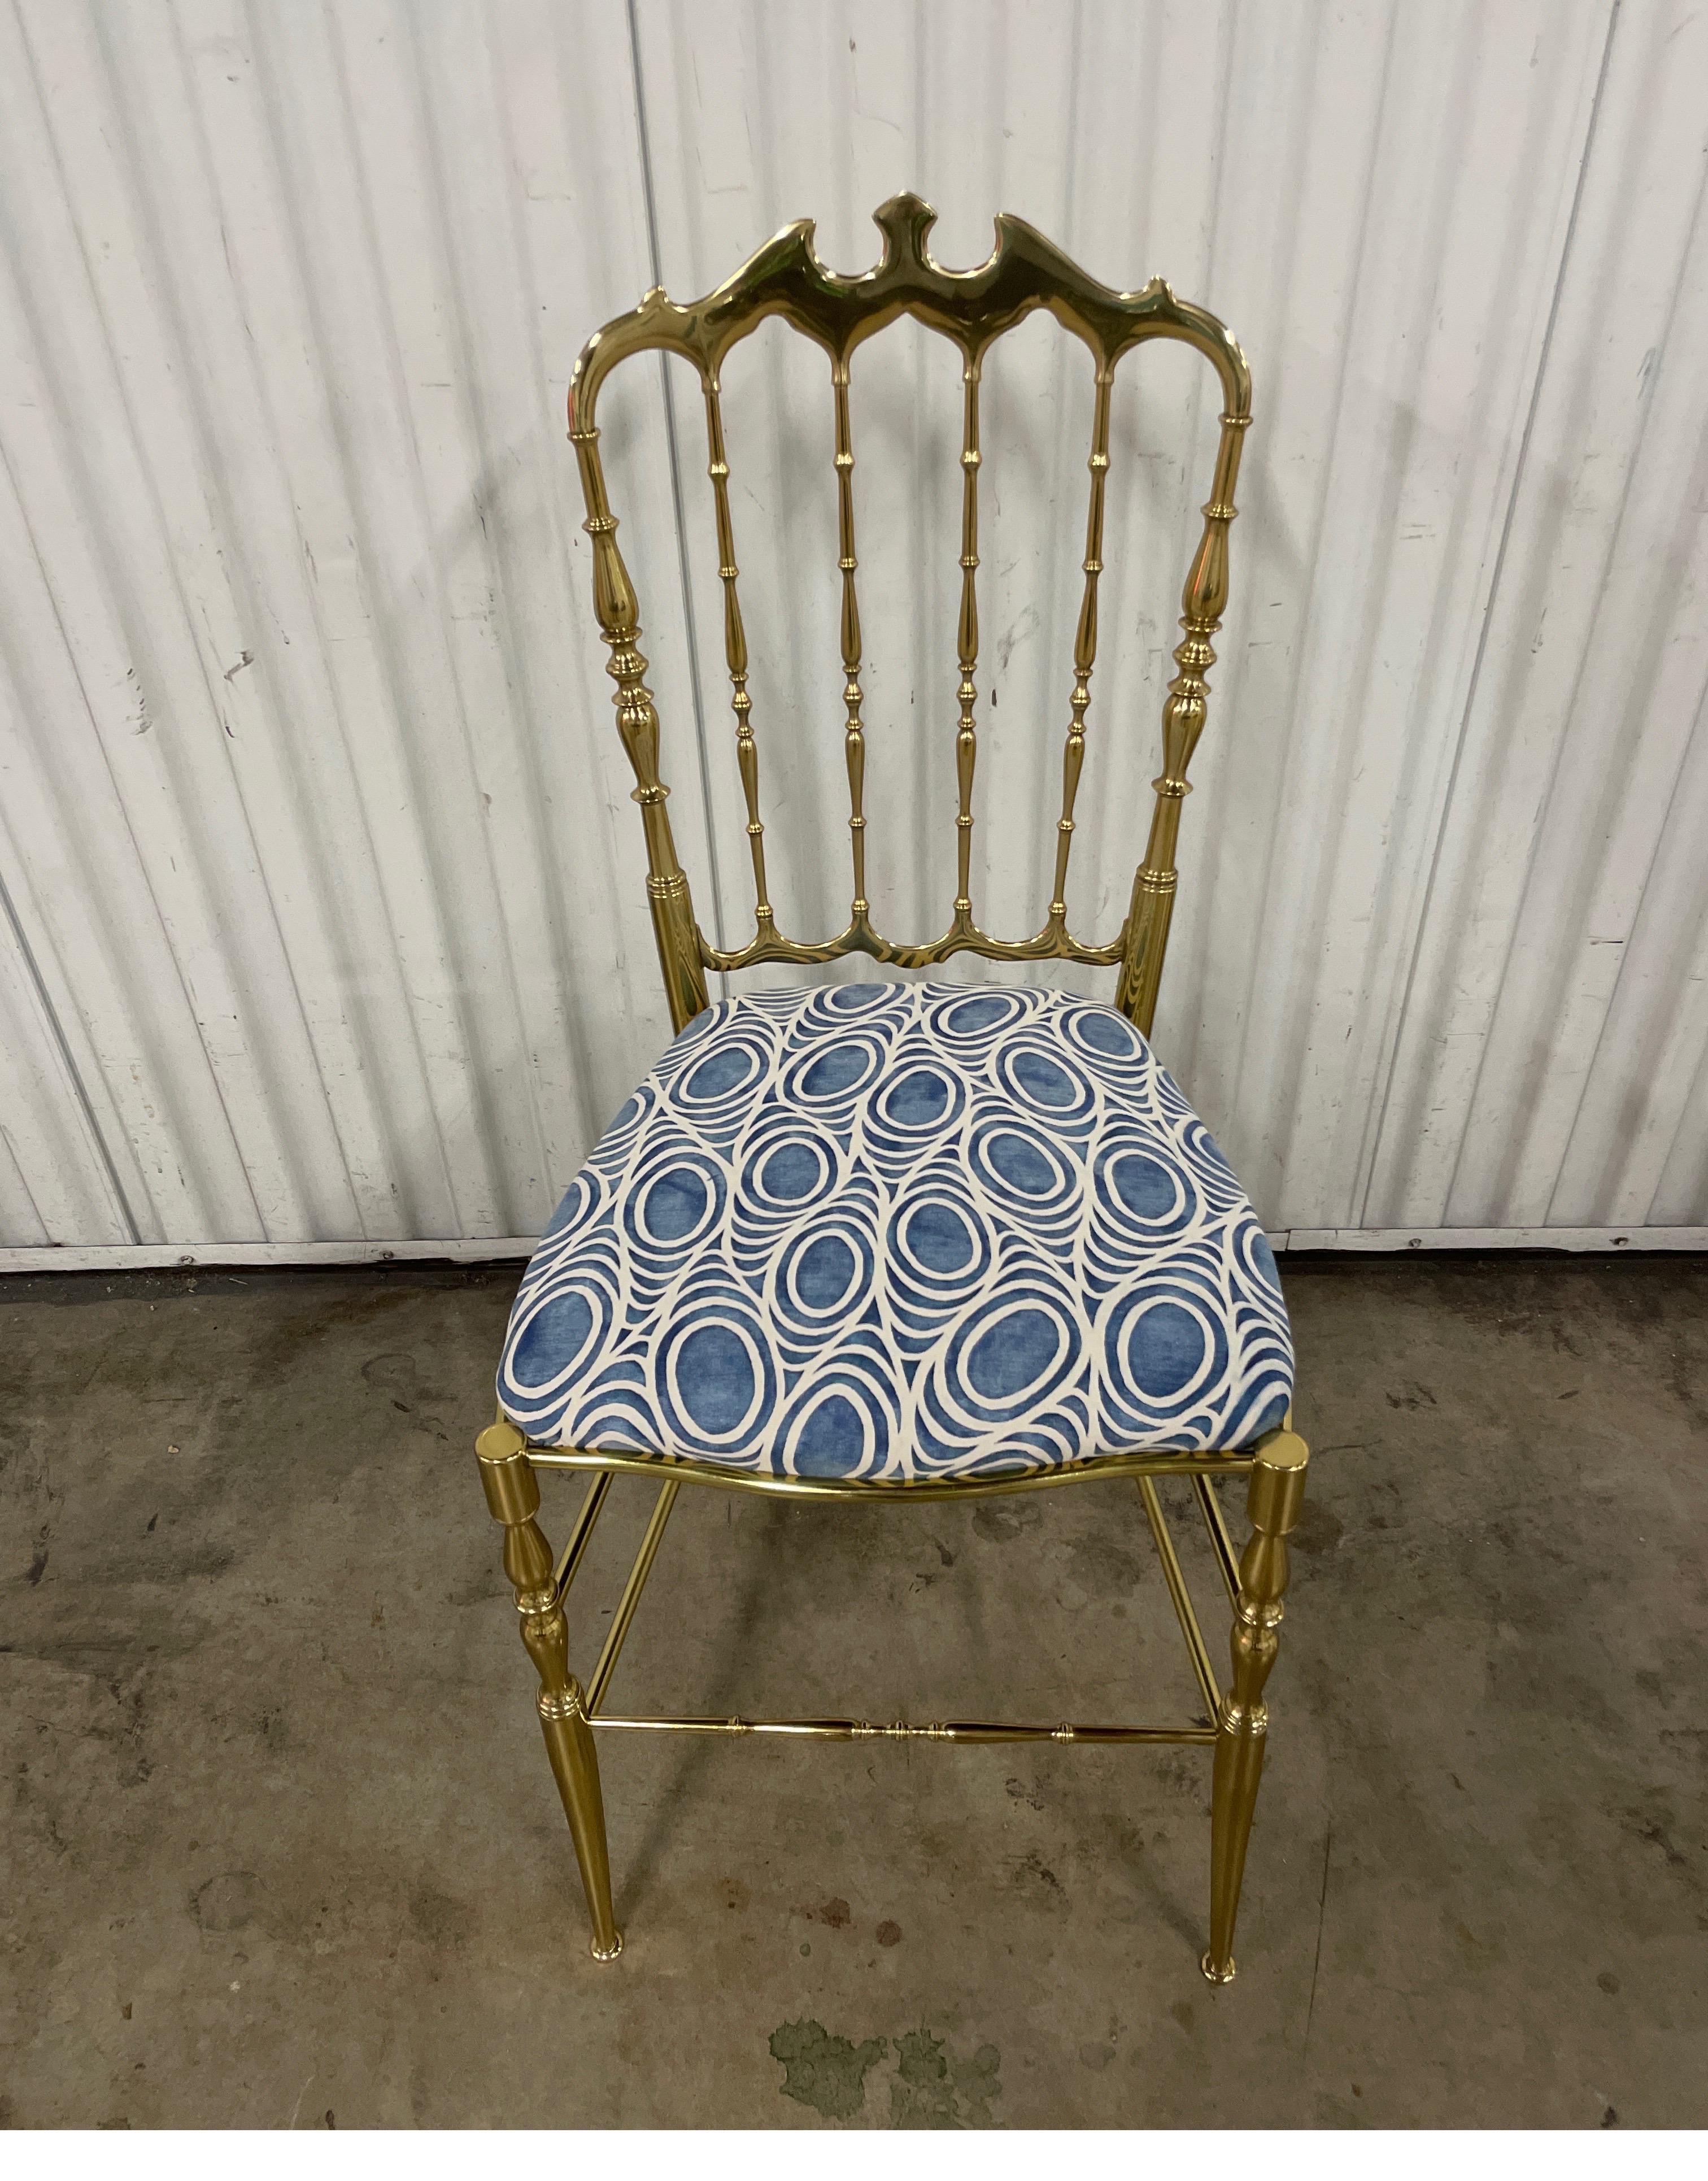 Vintage Solid Brass Italian Chiavari Chair with Fortuny Seat Covering For Sale 2